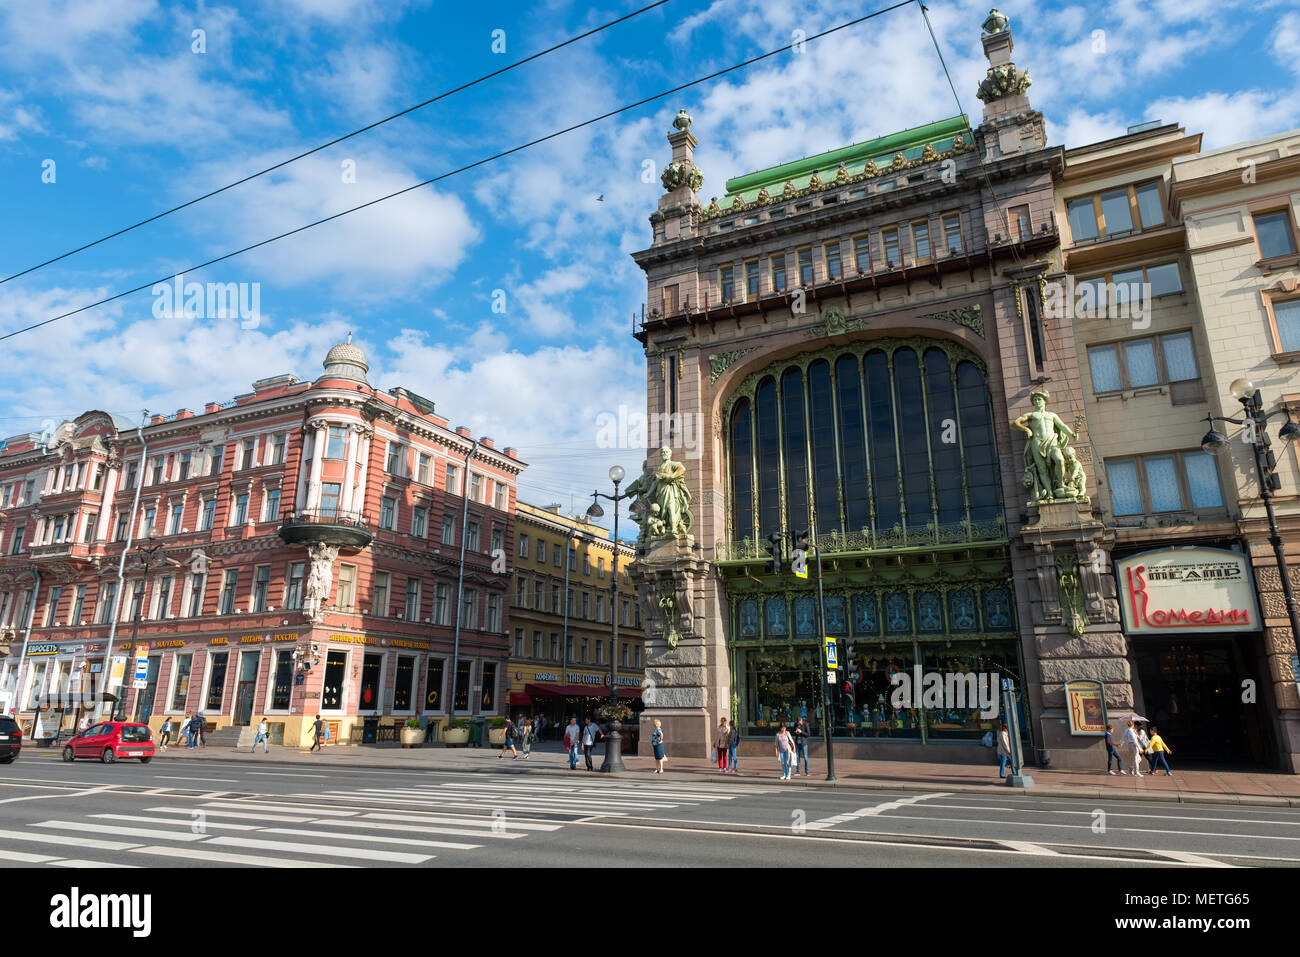 RUSSIA, SAINT PETERSBURG - AUGUST 18, 2017:Store of merchants Eliseevyh (Eliseevsky store building) on Nevsky Prospect in summer sunny day Stock Photo